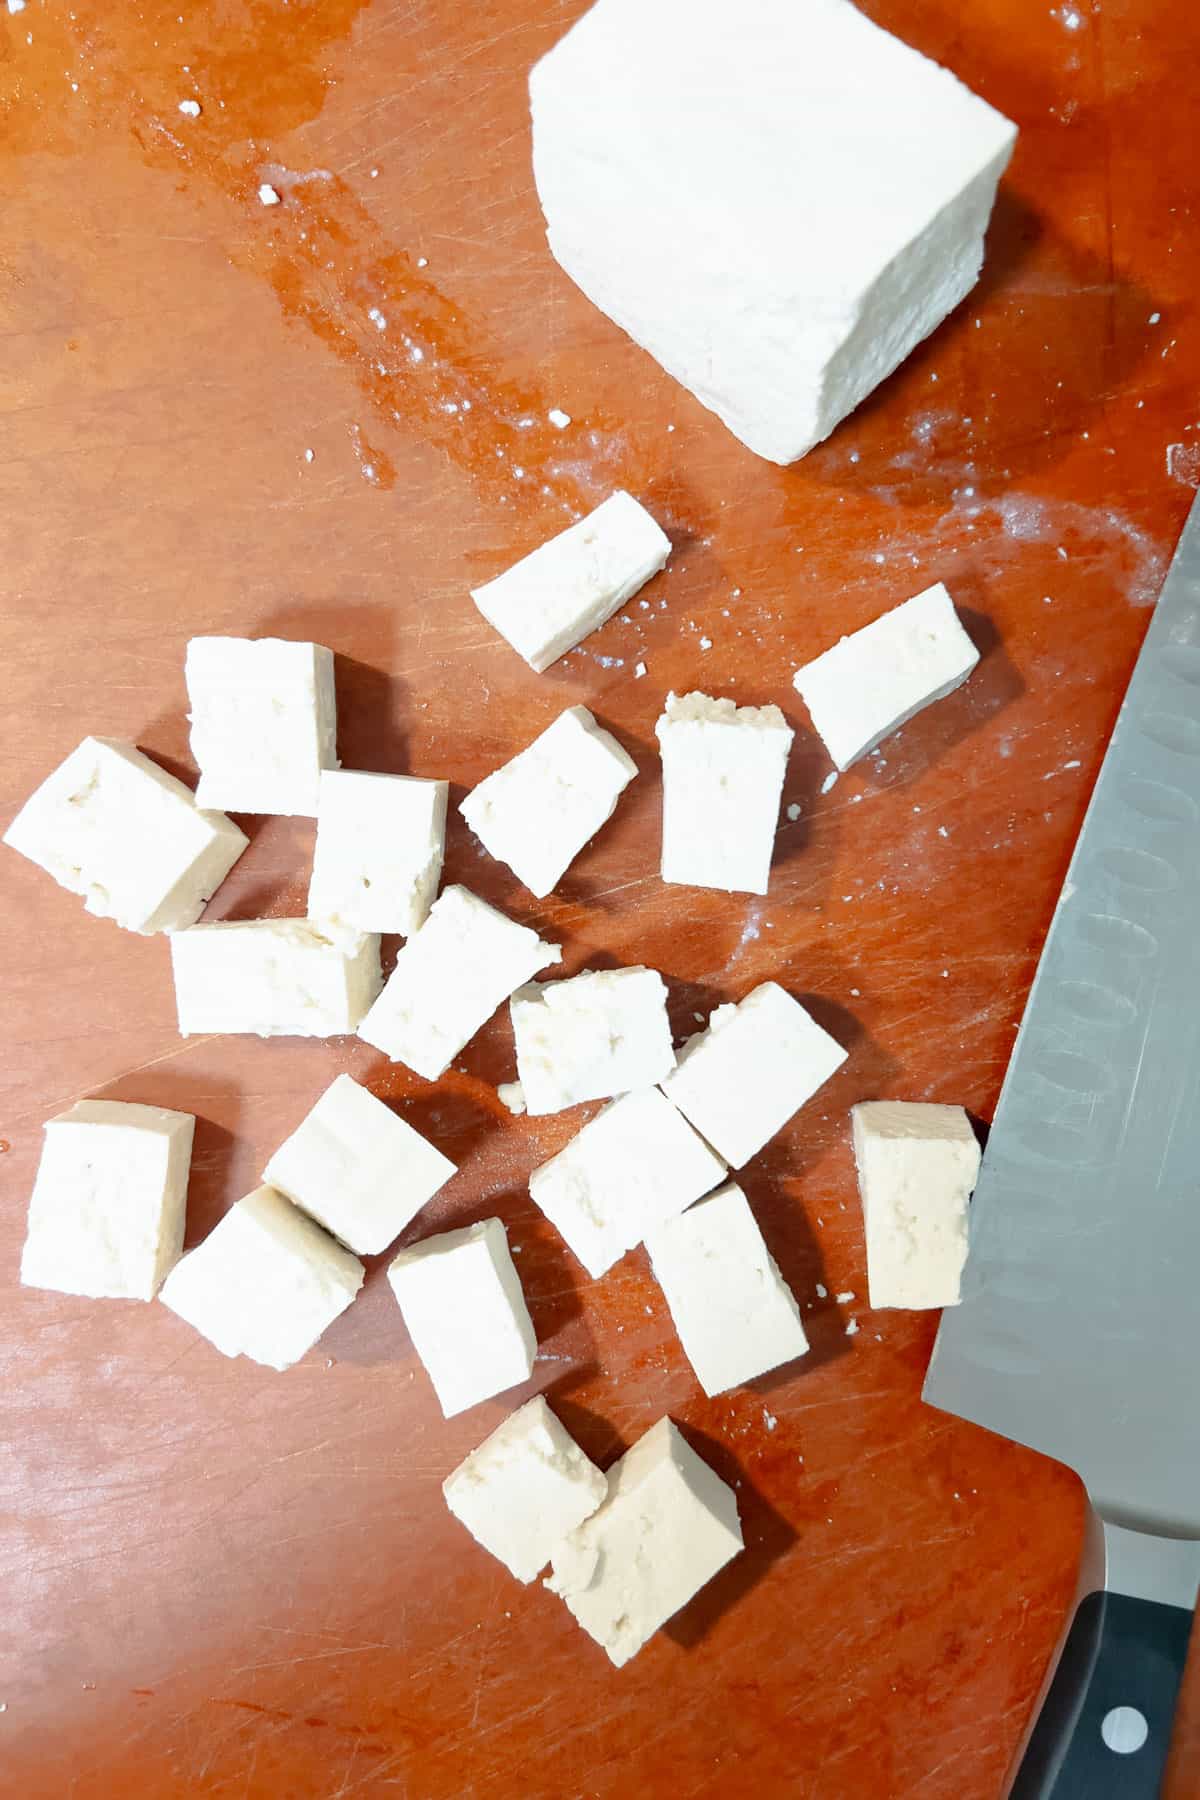 Diced tofu cubes on cutting board with chefs knife on side.